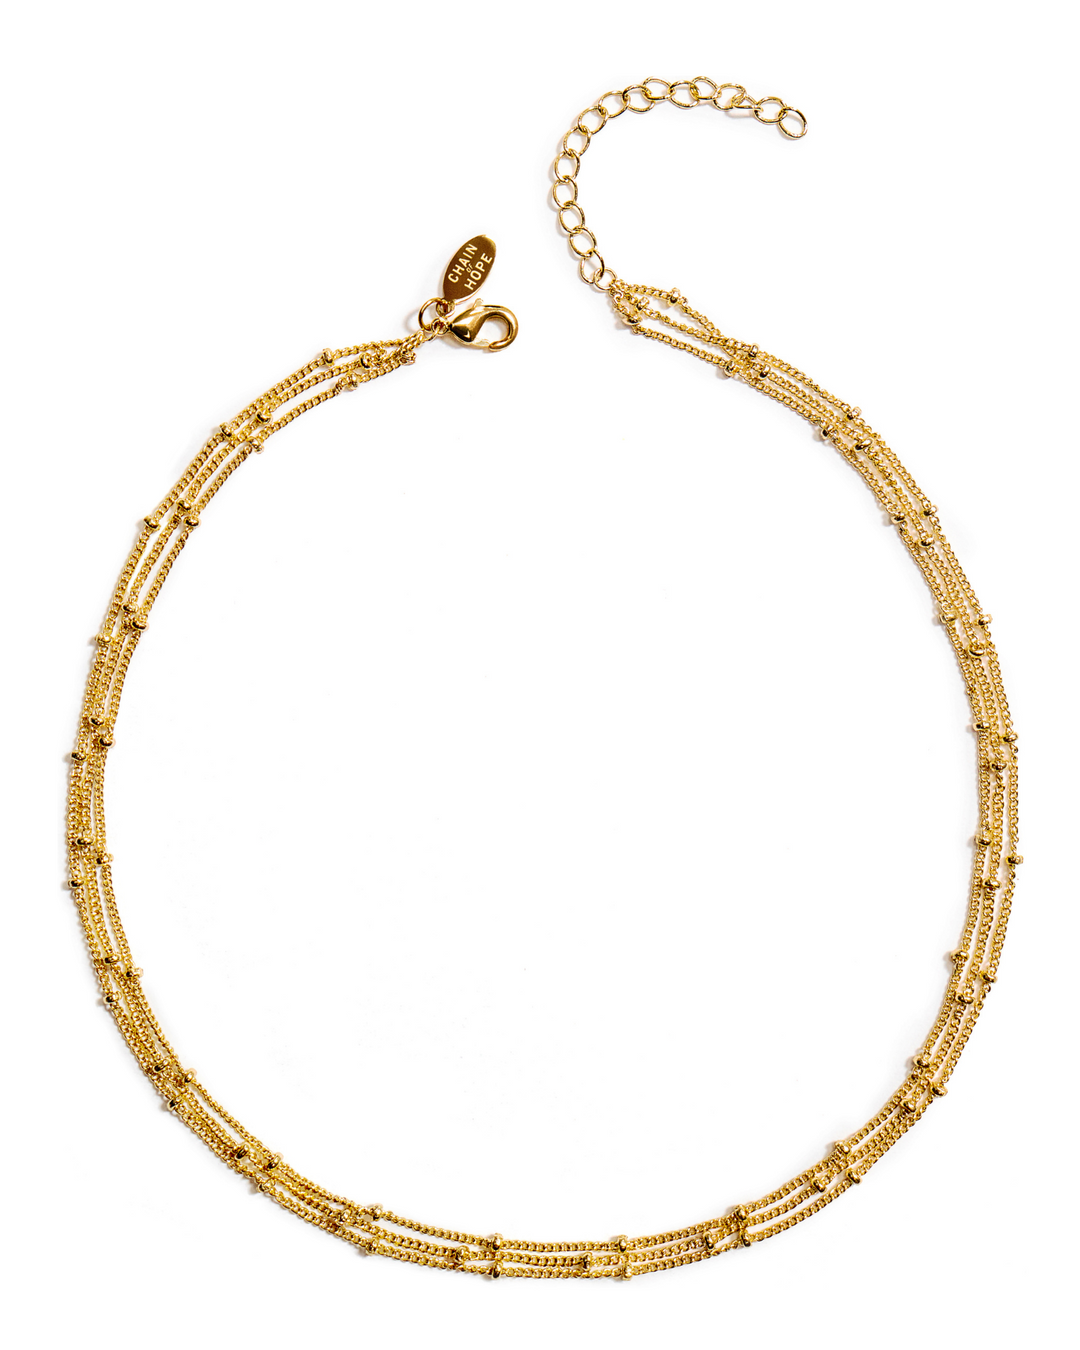 Benevolence La Paperclip Chain Necklace for Women with Paperclip Bracelet Set - 14K Gold